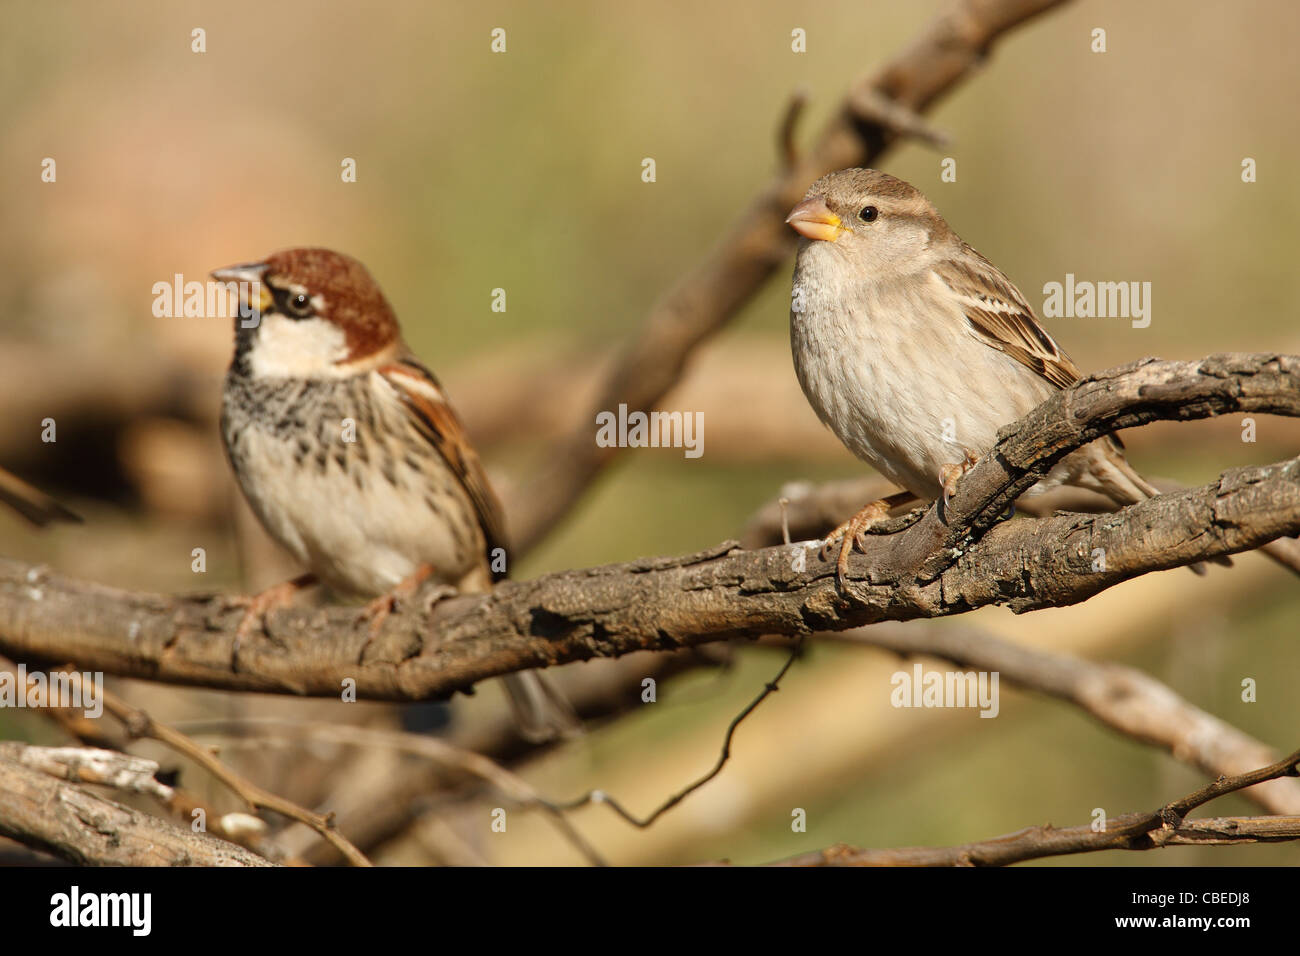 Spanish Sparrow (Passer hispaniolensis), male and female perched on twigs. Stock Photo